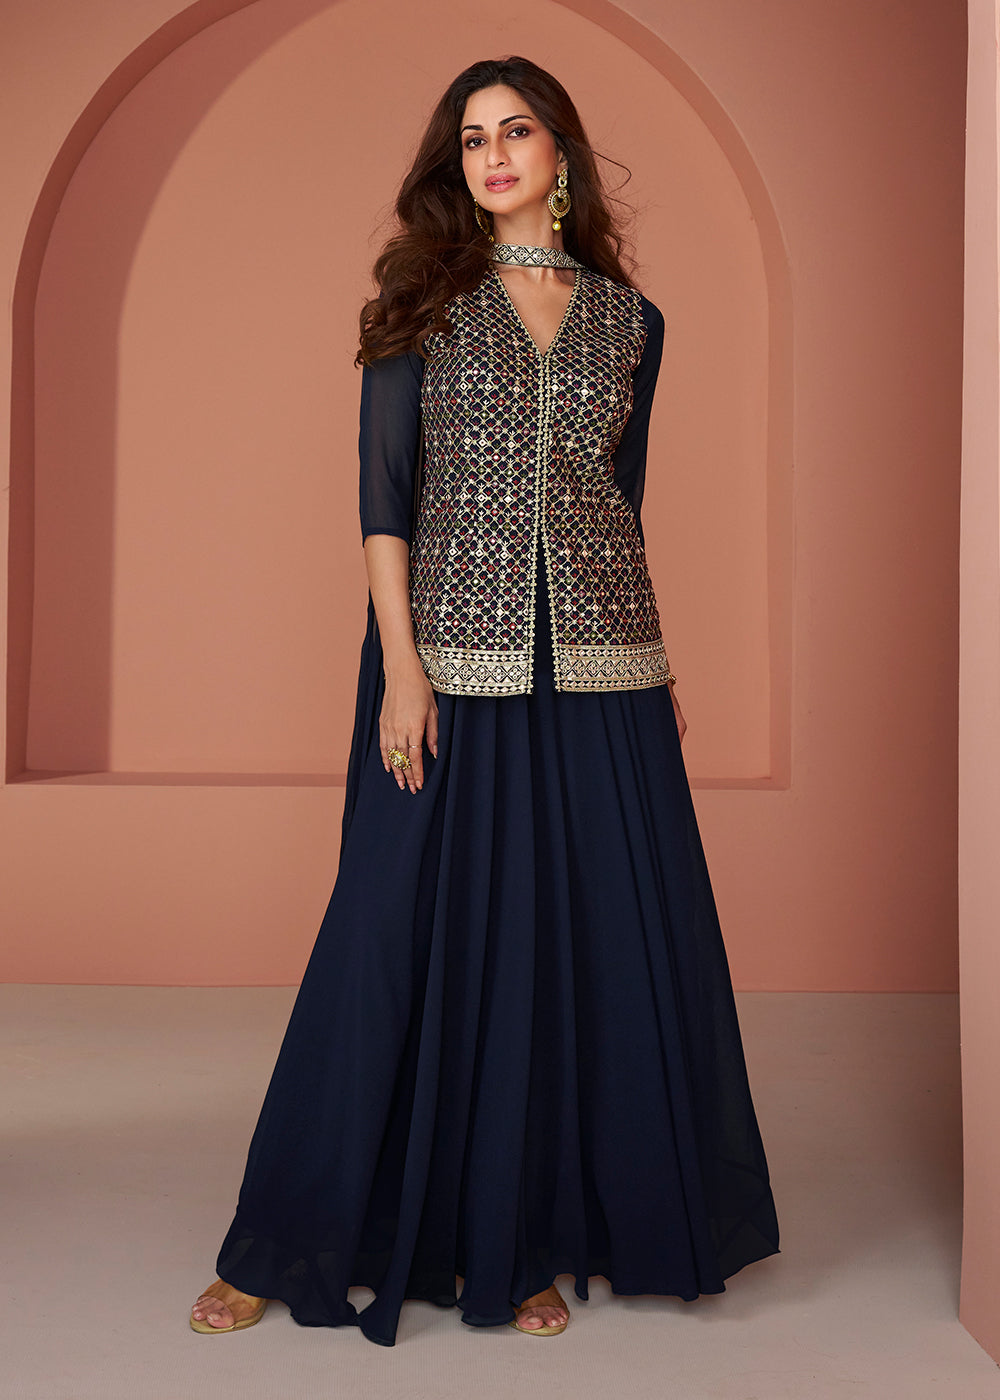 Buy Now Navy Blue Embroidered Georgette Indo Western Palazzo Suit Online in USA, UK, Canada, Germany, Australia & Worldwide at Empress Clothing.